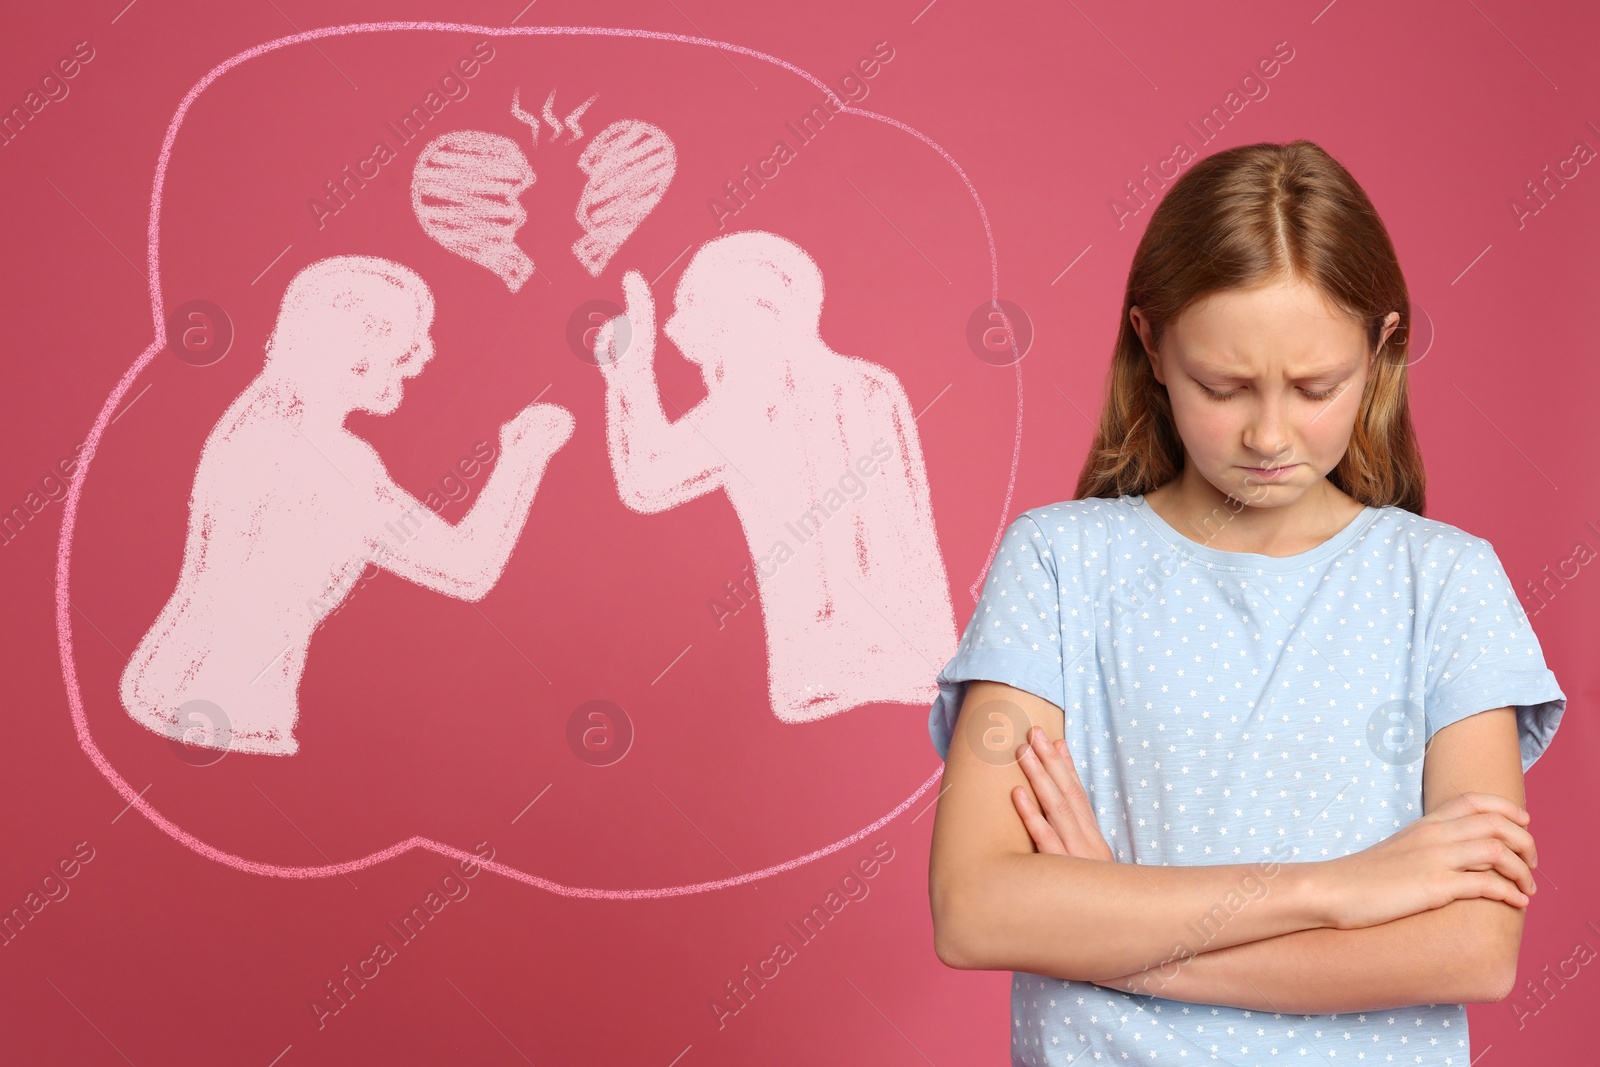 Image of Cute girl because of parents divorce on pink background. Illustration of broken heart and arguing couple